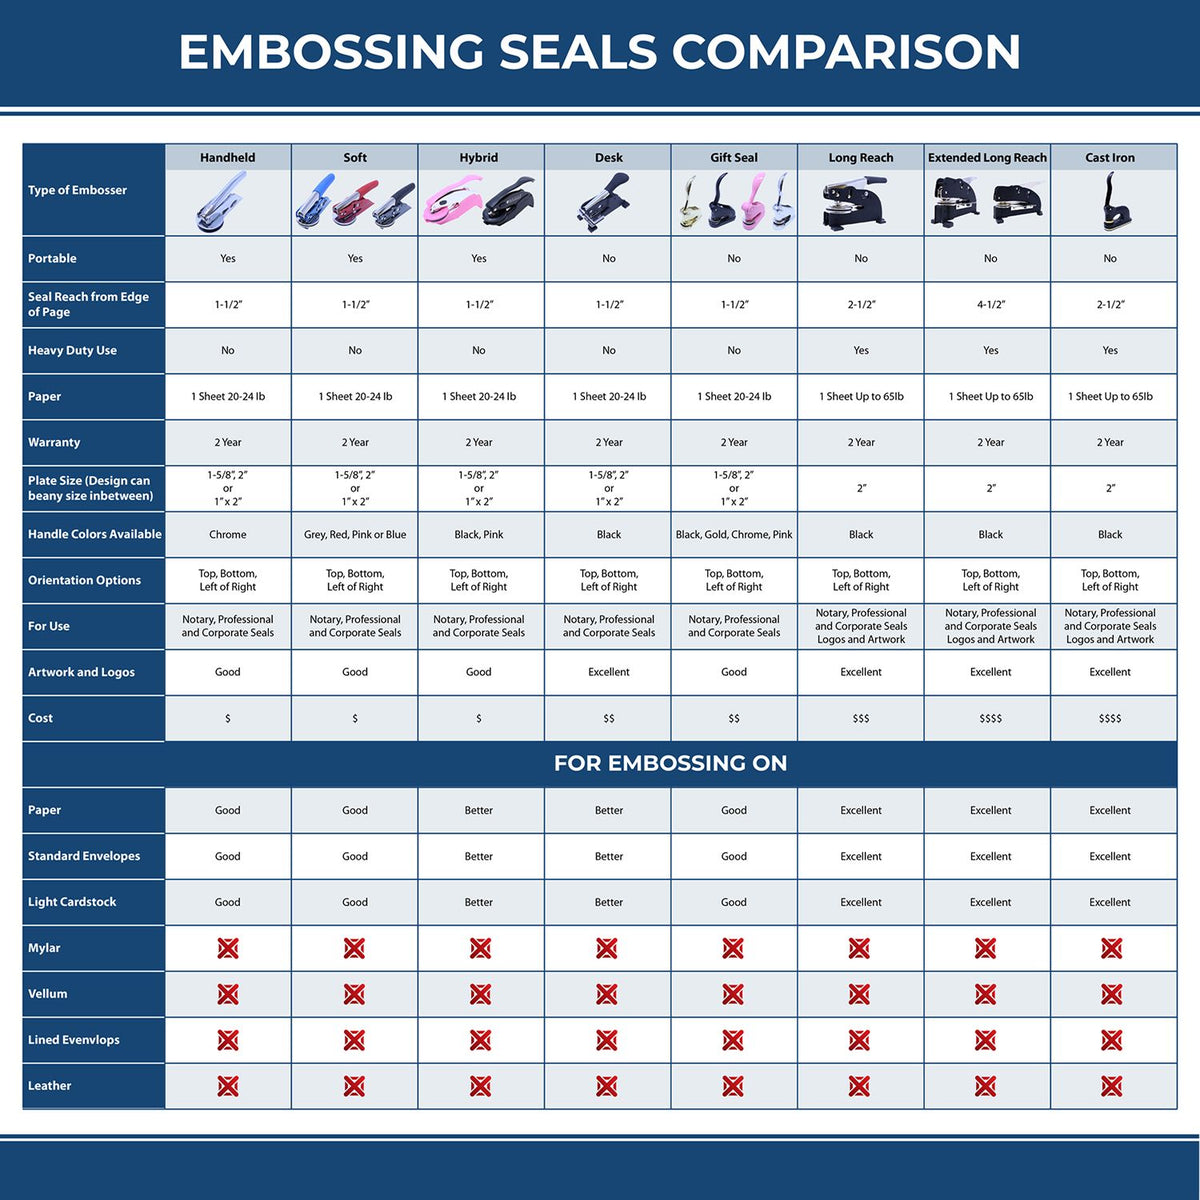 A comparison chart for the different types of mount models available for the Hybrid Florida Architect Seal